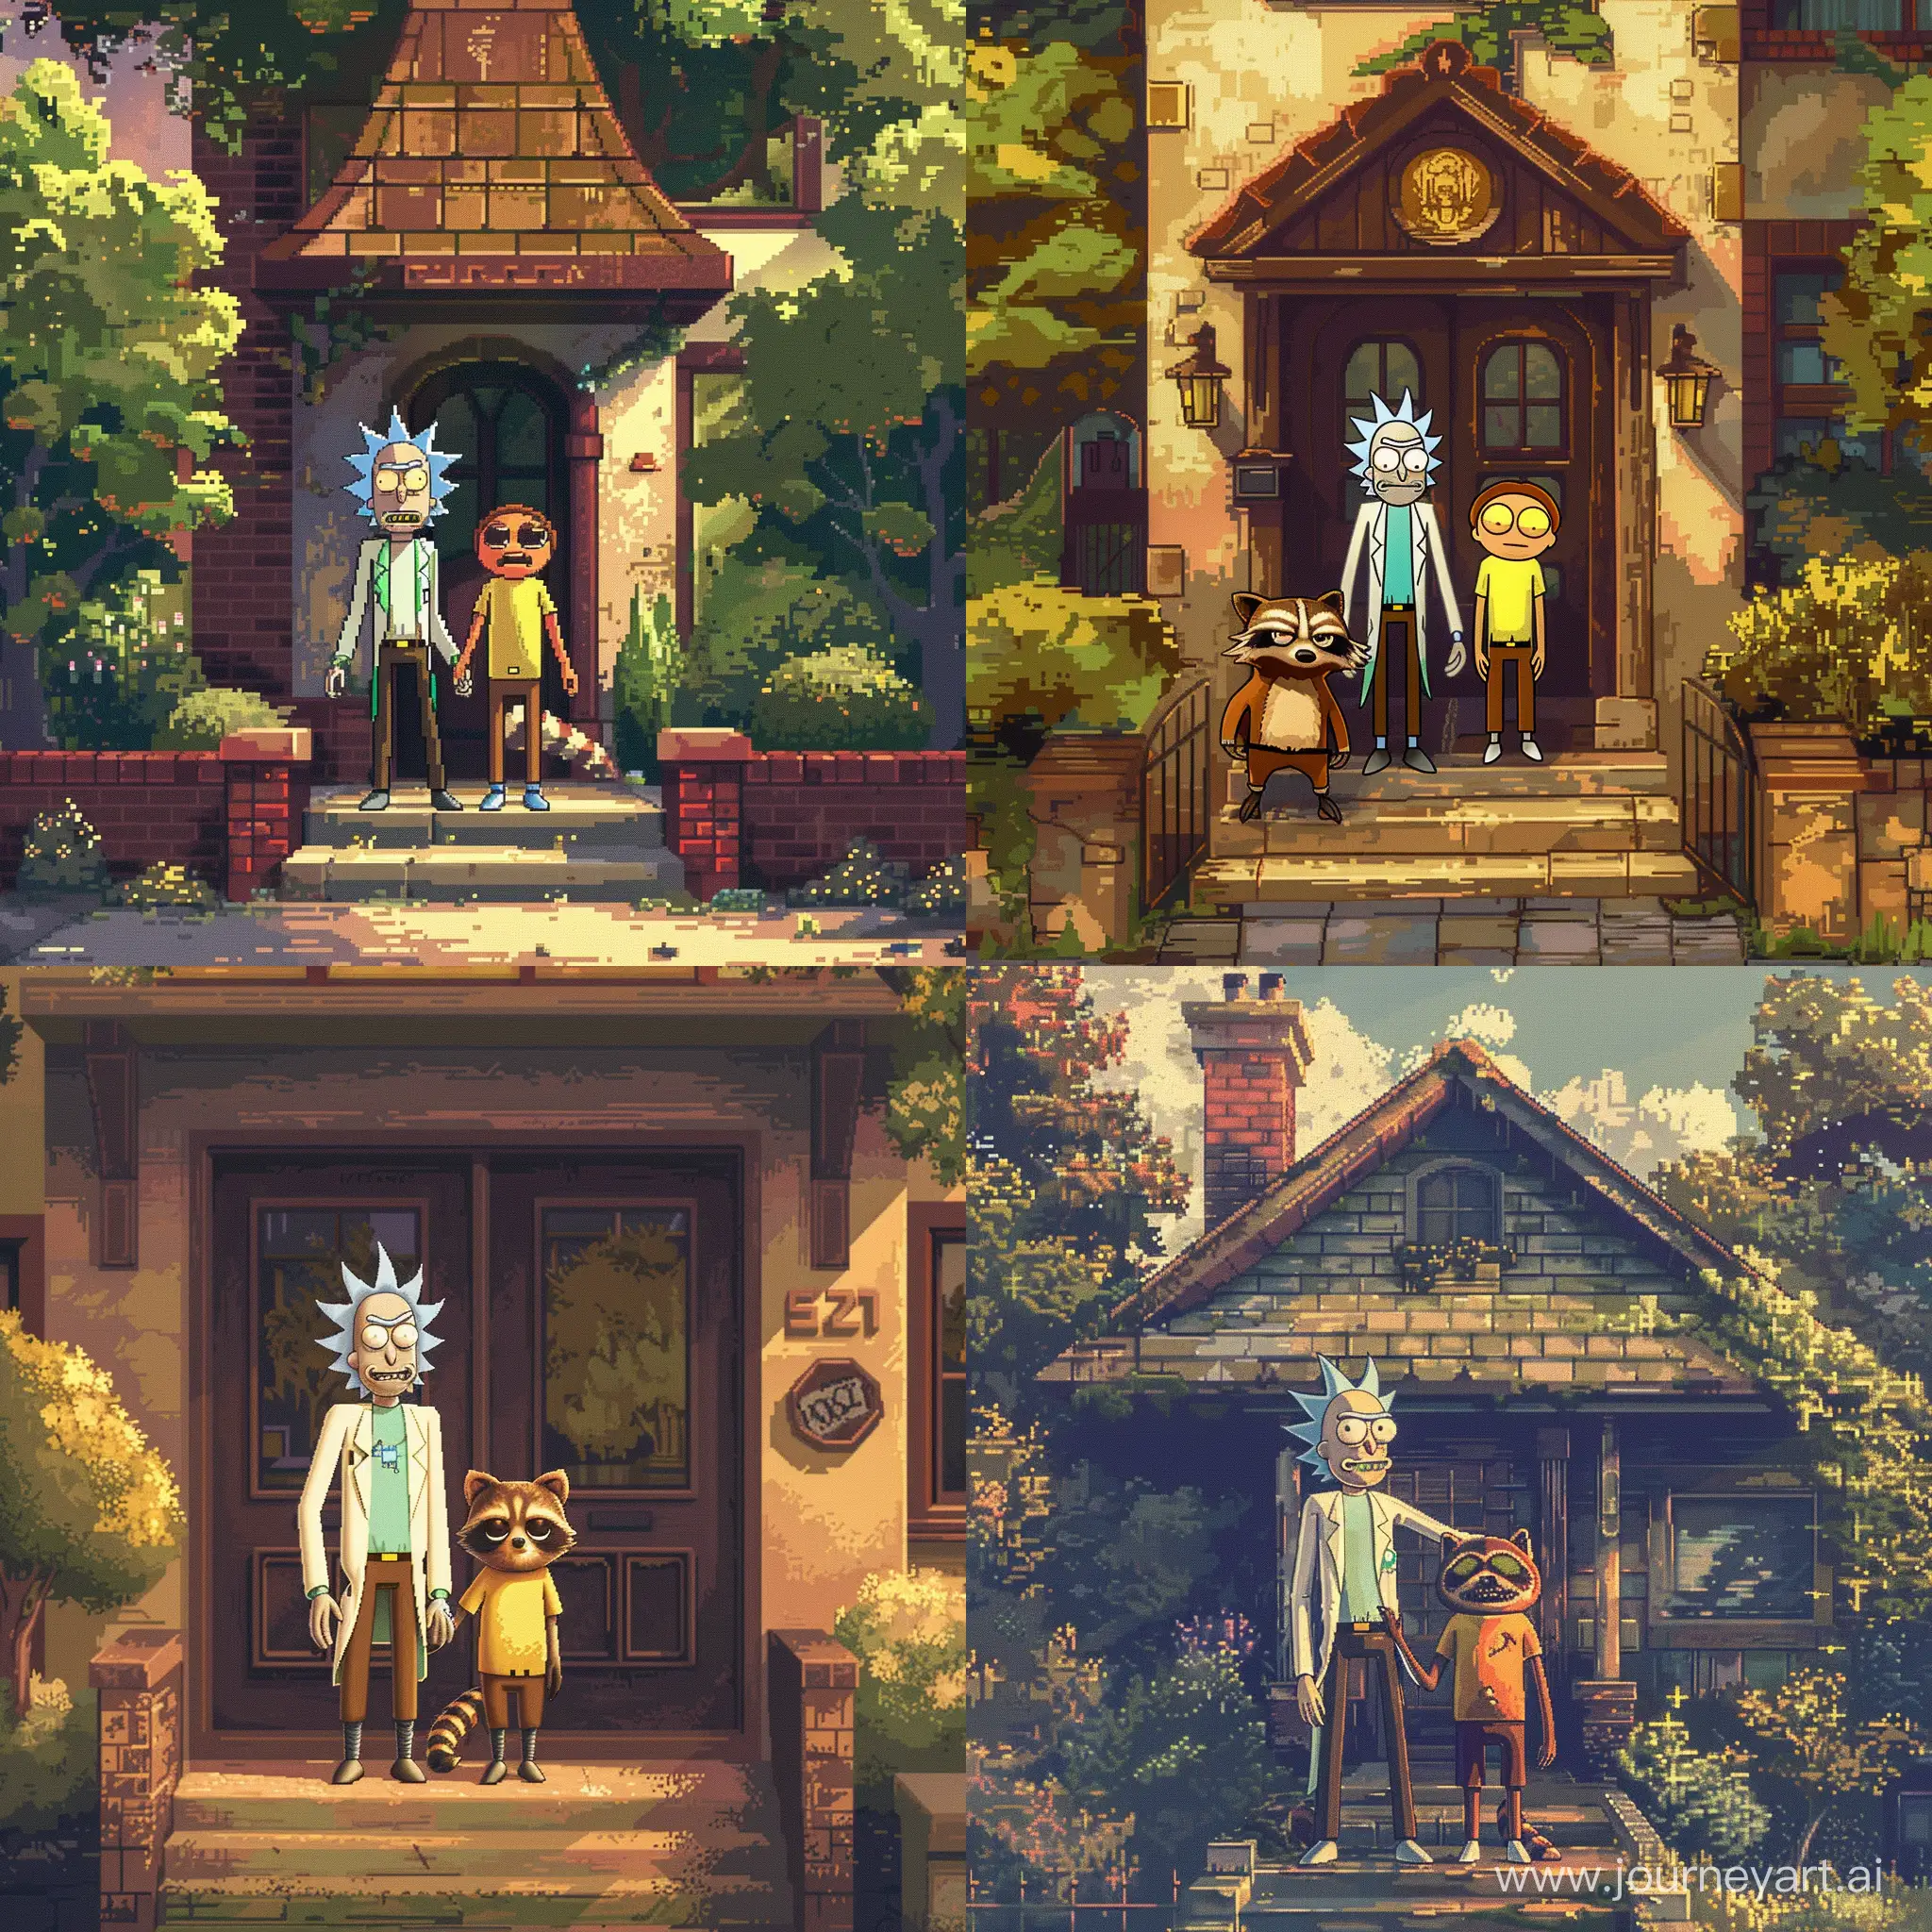 Raccoonized-Rick-and-Morty-Pixel-Art-Standing-on-House-Threshold